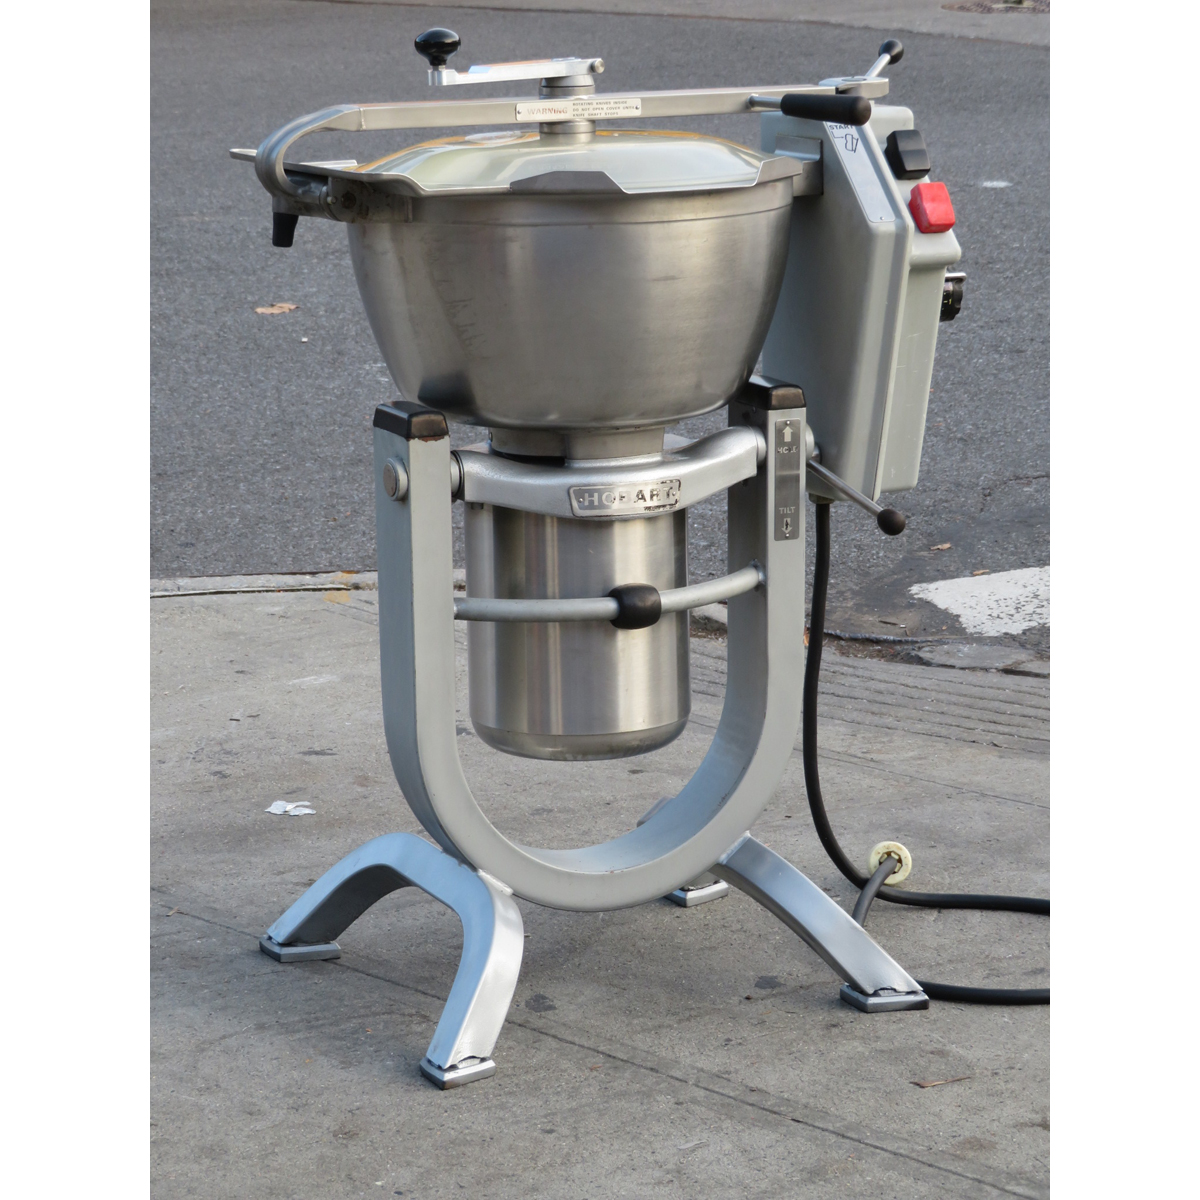 Hobart HCM-450 Vertical Cutter Mixer 45 Quart, Used Excellent Condition image 1